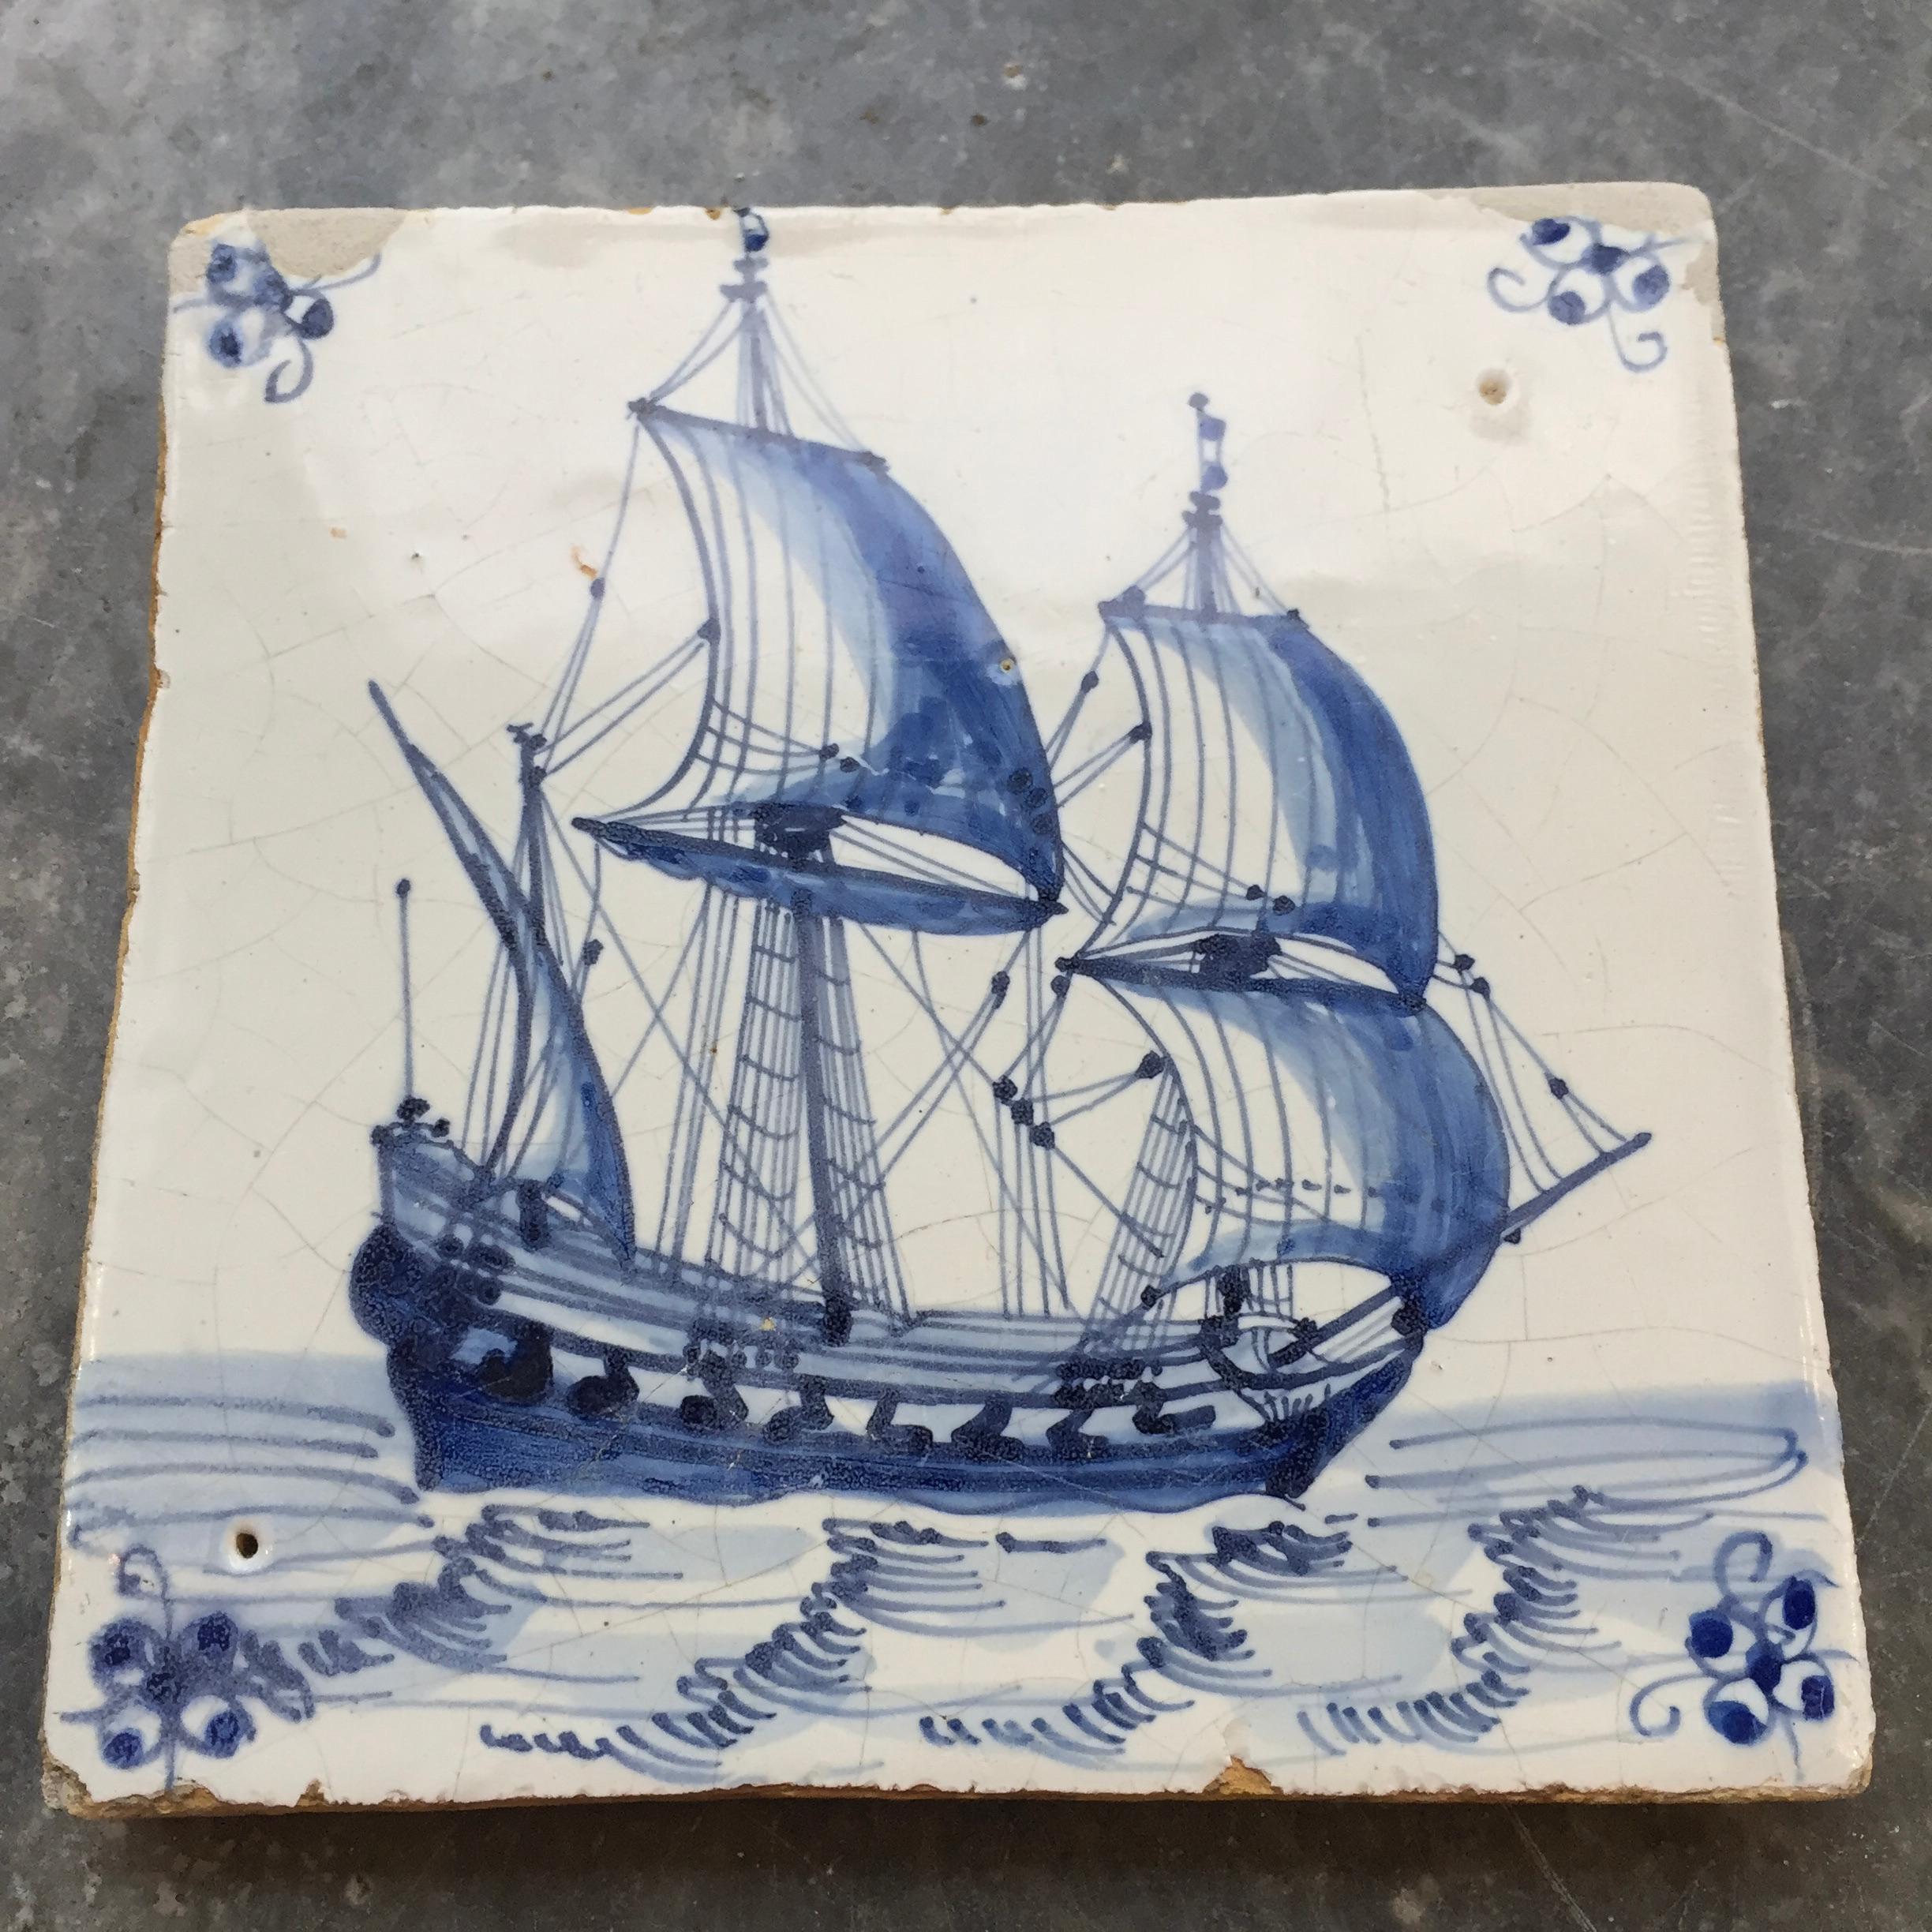 Fired Rare Dutch Delft Tile with VOC Ship, Early 17th Century